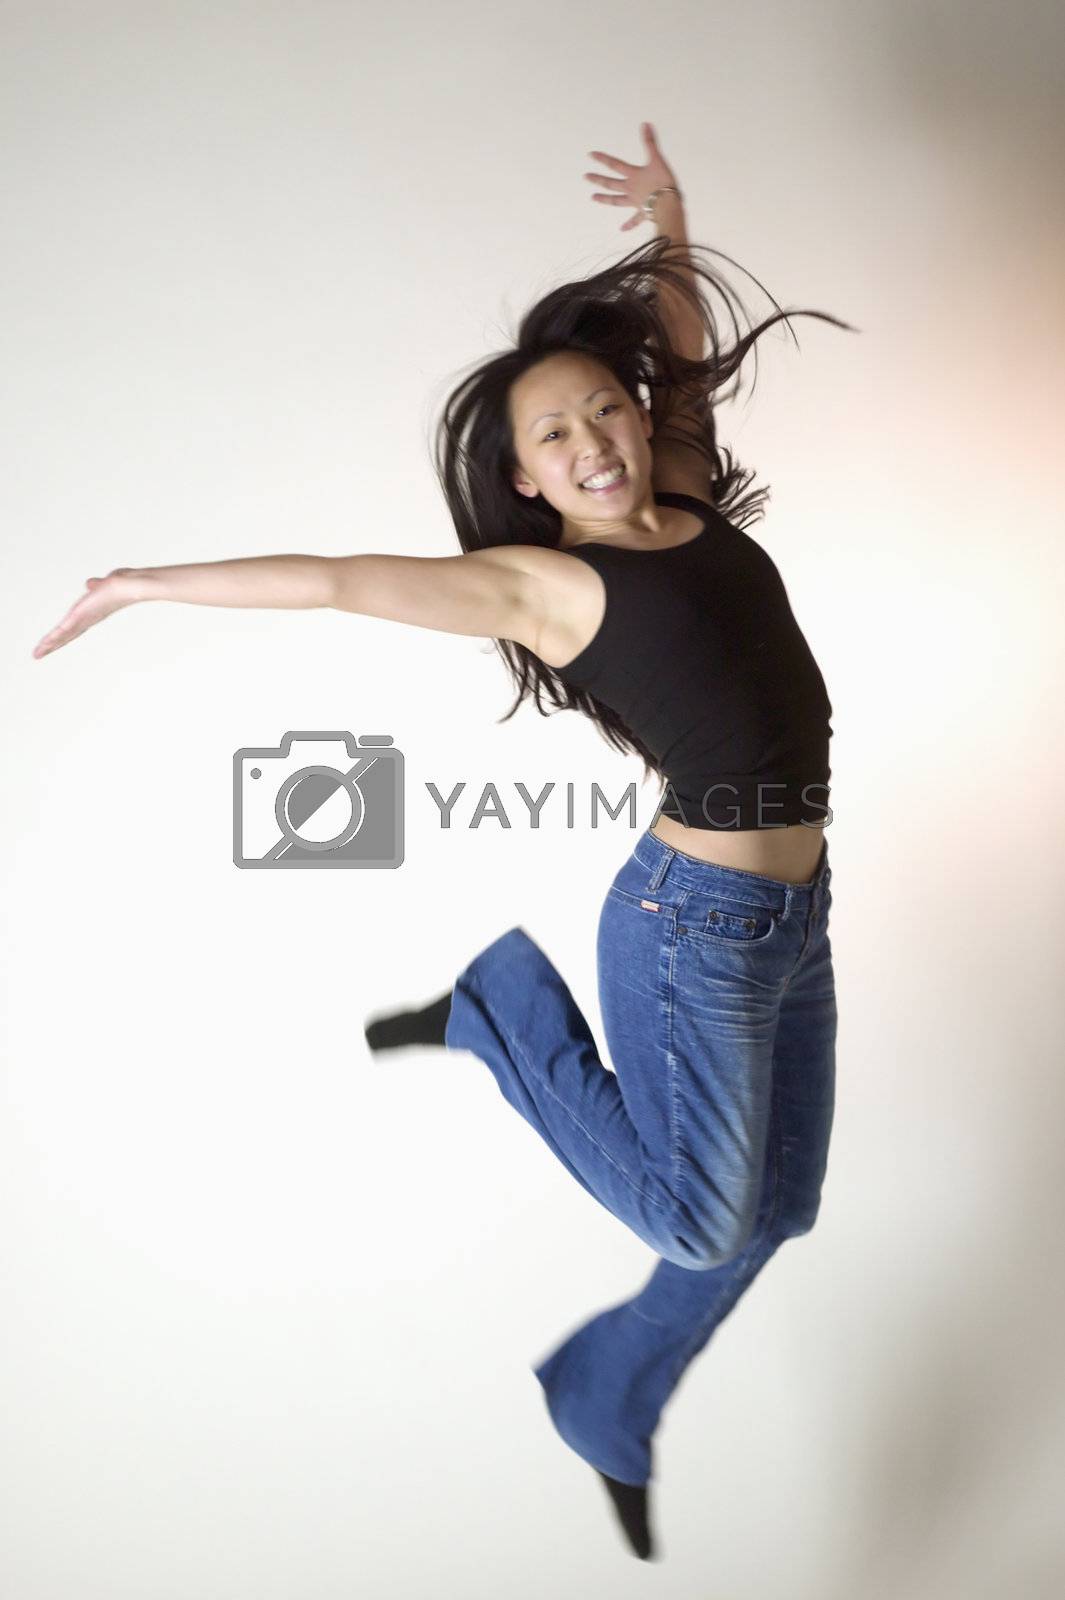 Royalty free image of Young Asian woman jumps for joy by edbockstock